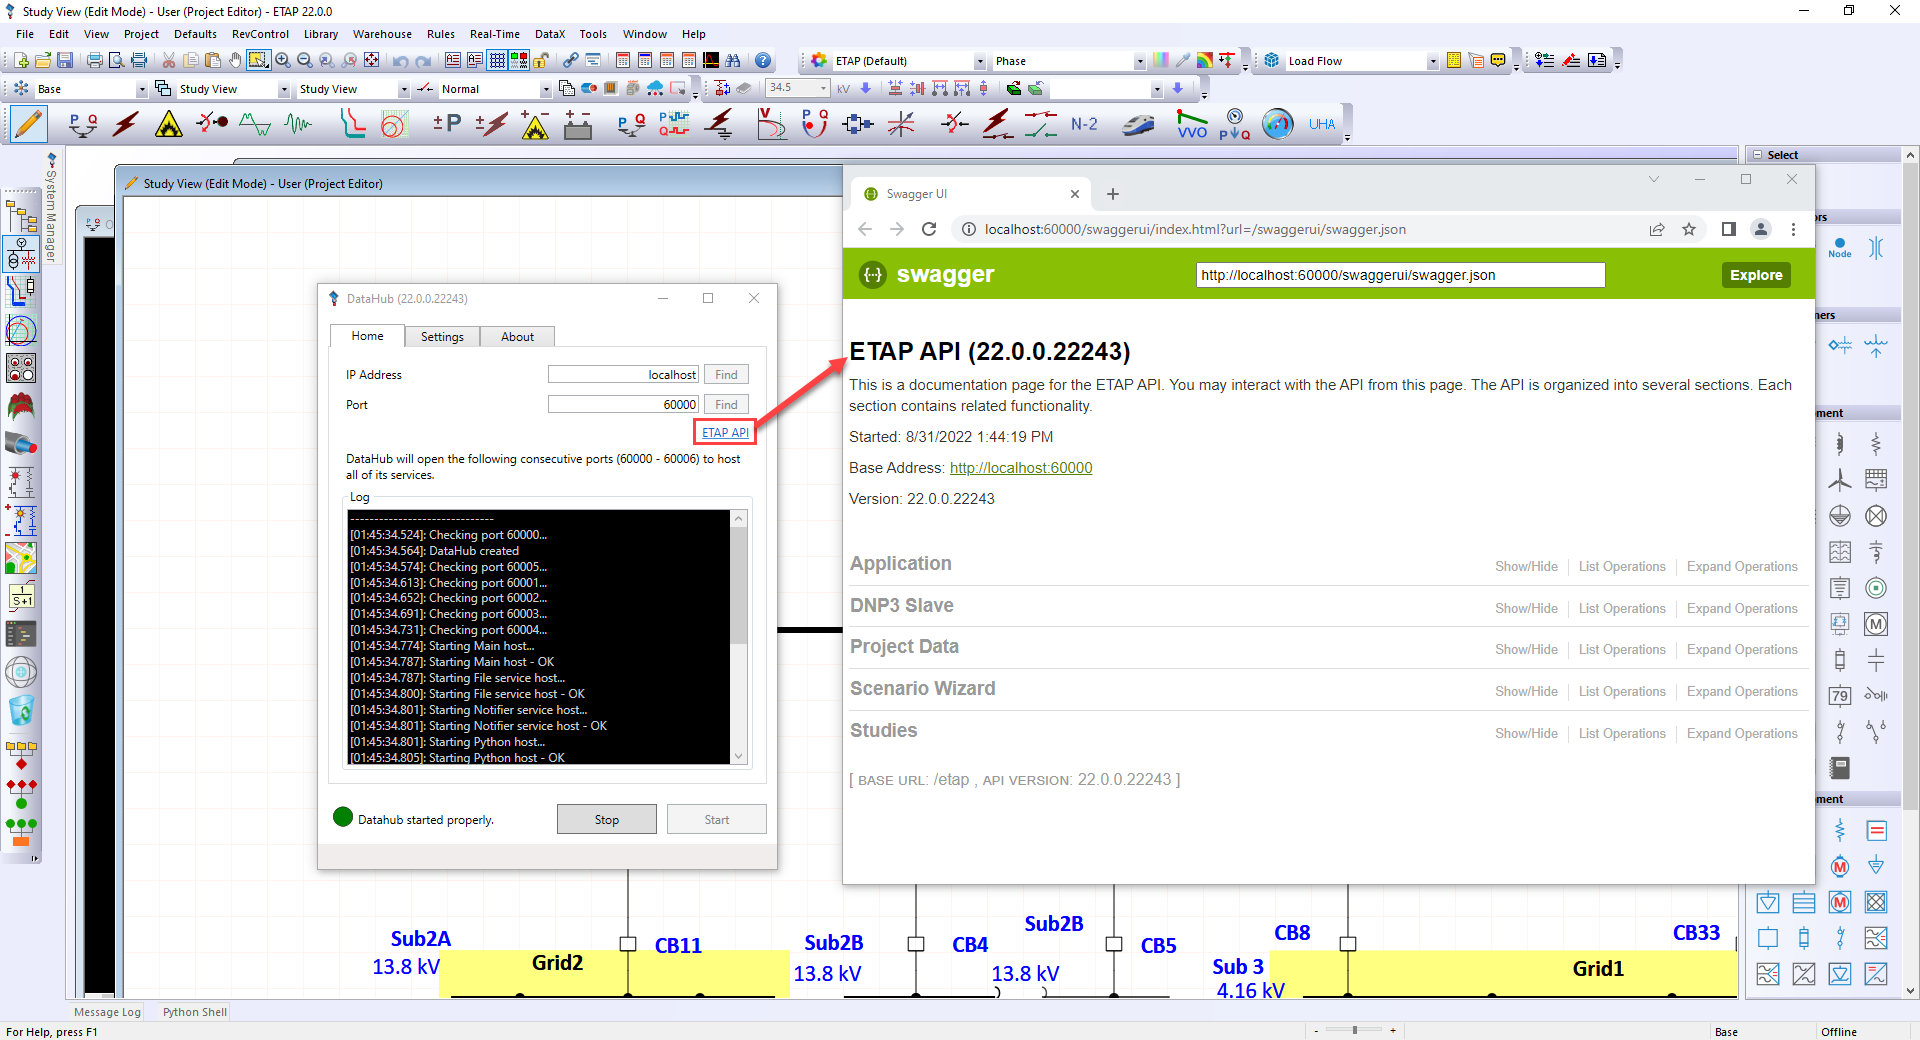 Showing the etapAPI™ module with Swagger interface